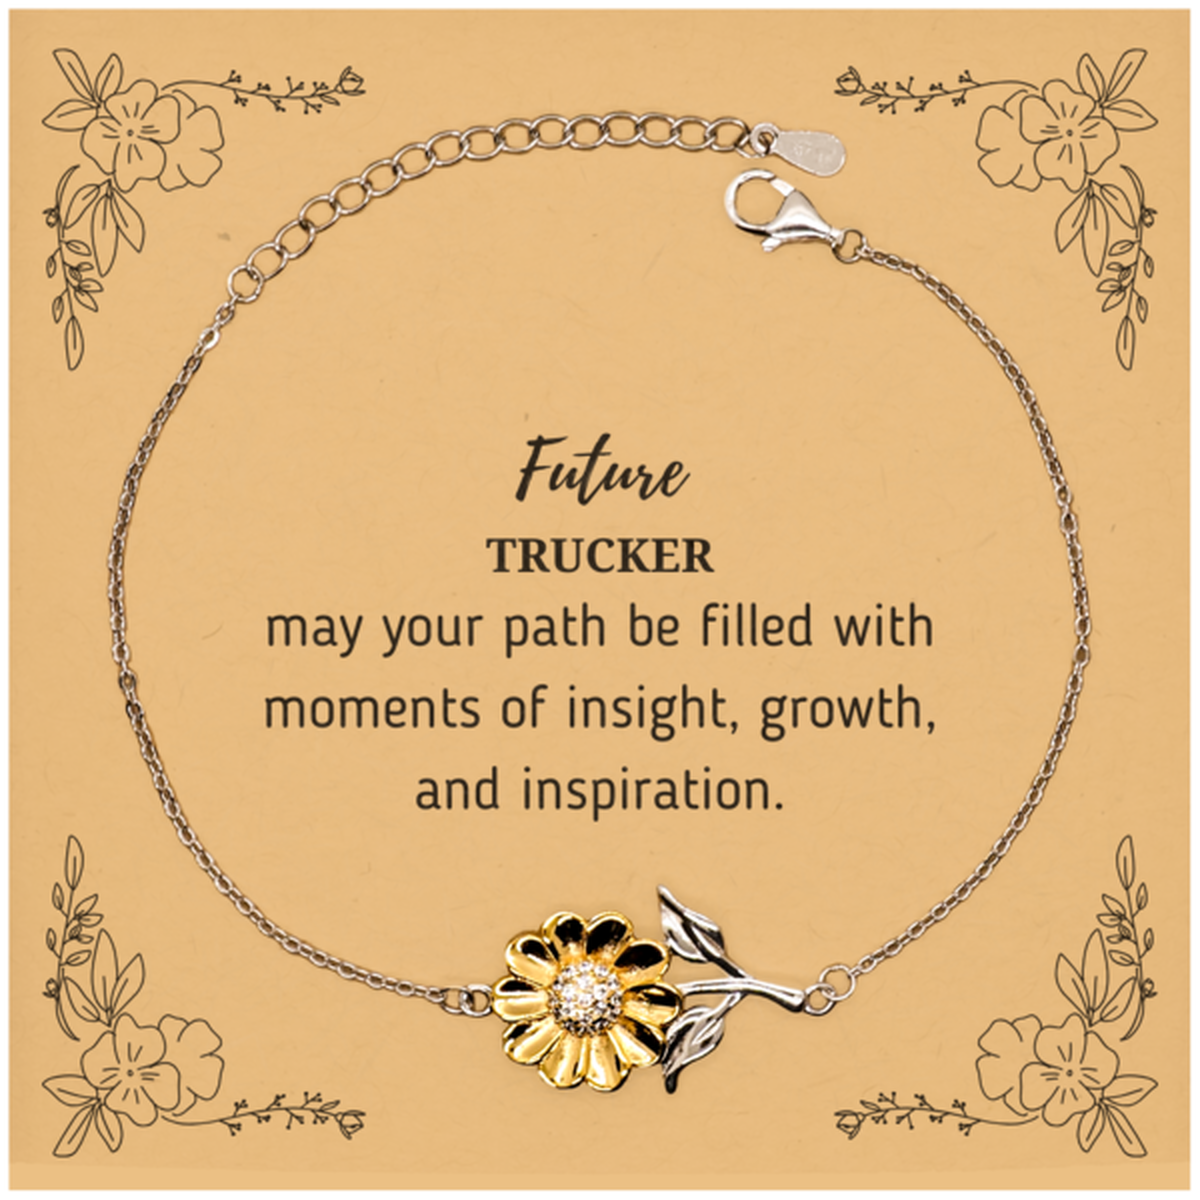 Future Trucker Gifts, May your path be filled with moments of insight, Graduation Gifts for New Trucker, Christmas Unique Sunflower Bracelet For Men, Women, Friends